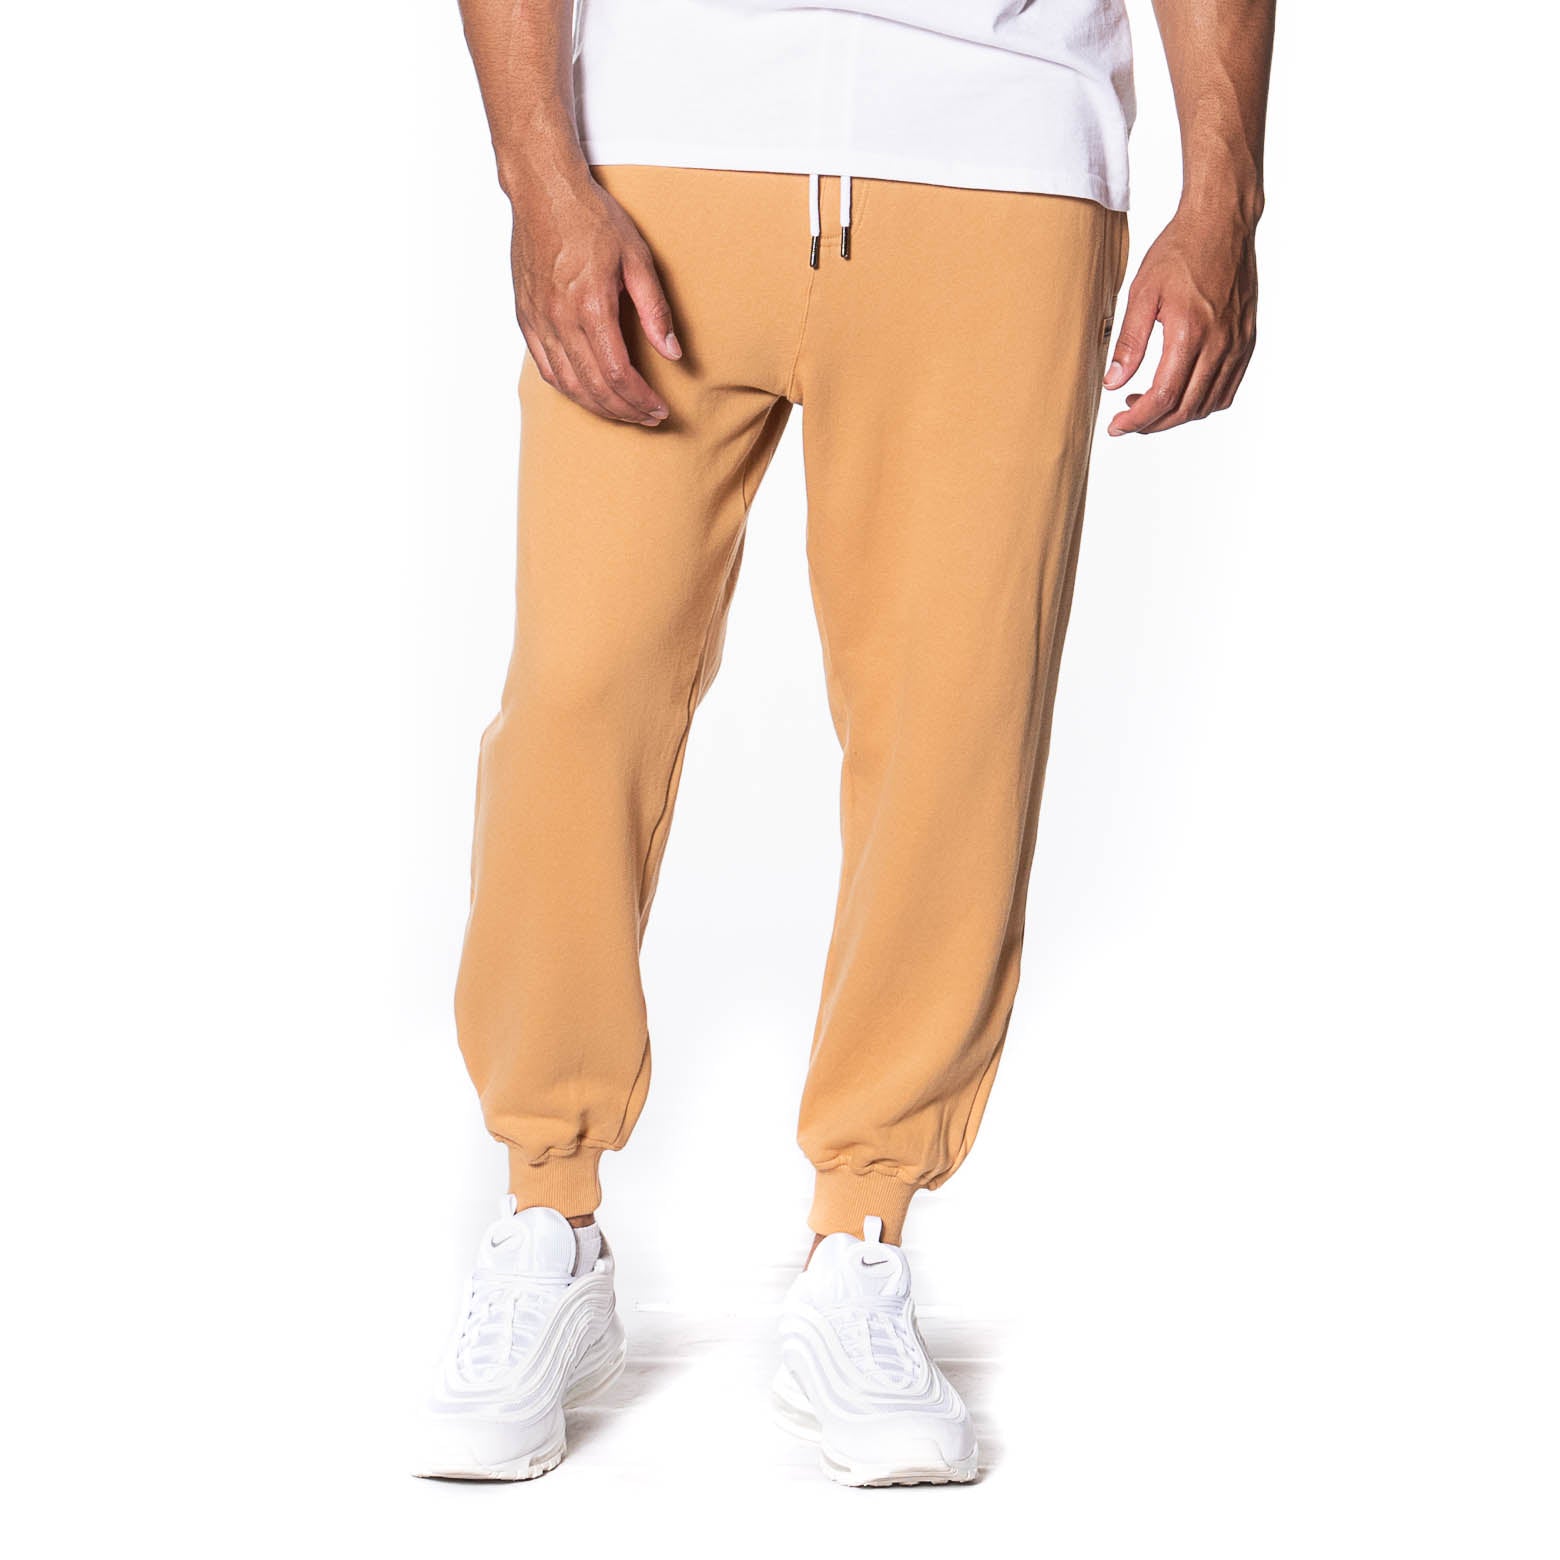 LUXE-T, LUXURY SPORT PANTS - DTLR - 4X (38W x 33L) ($59.00) *NEW WITH  TAGS*